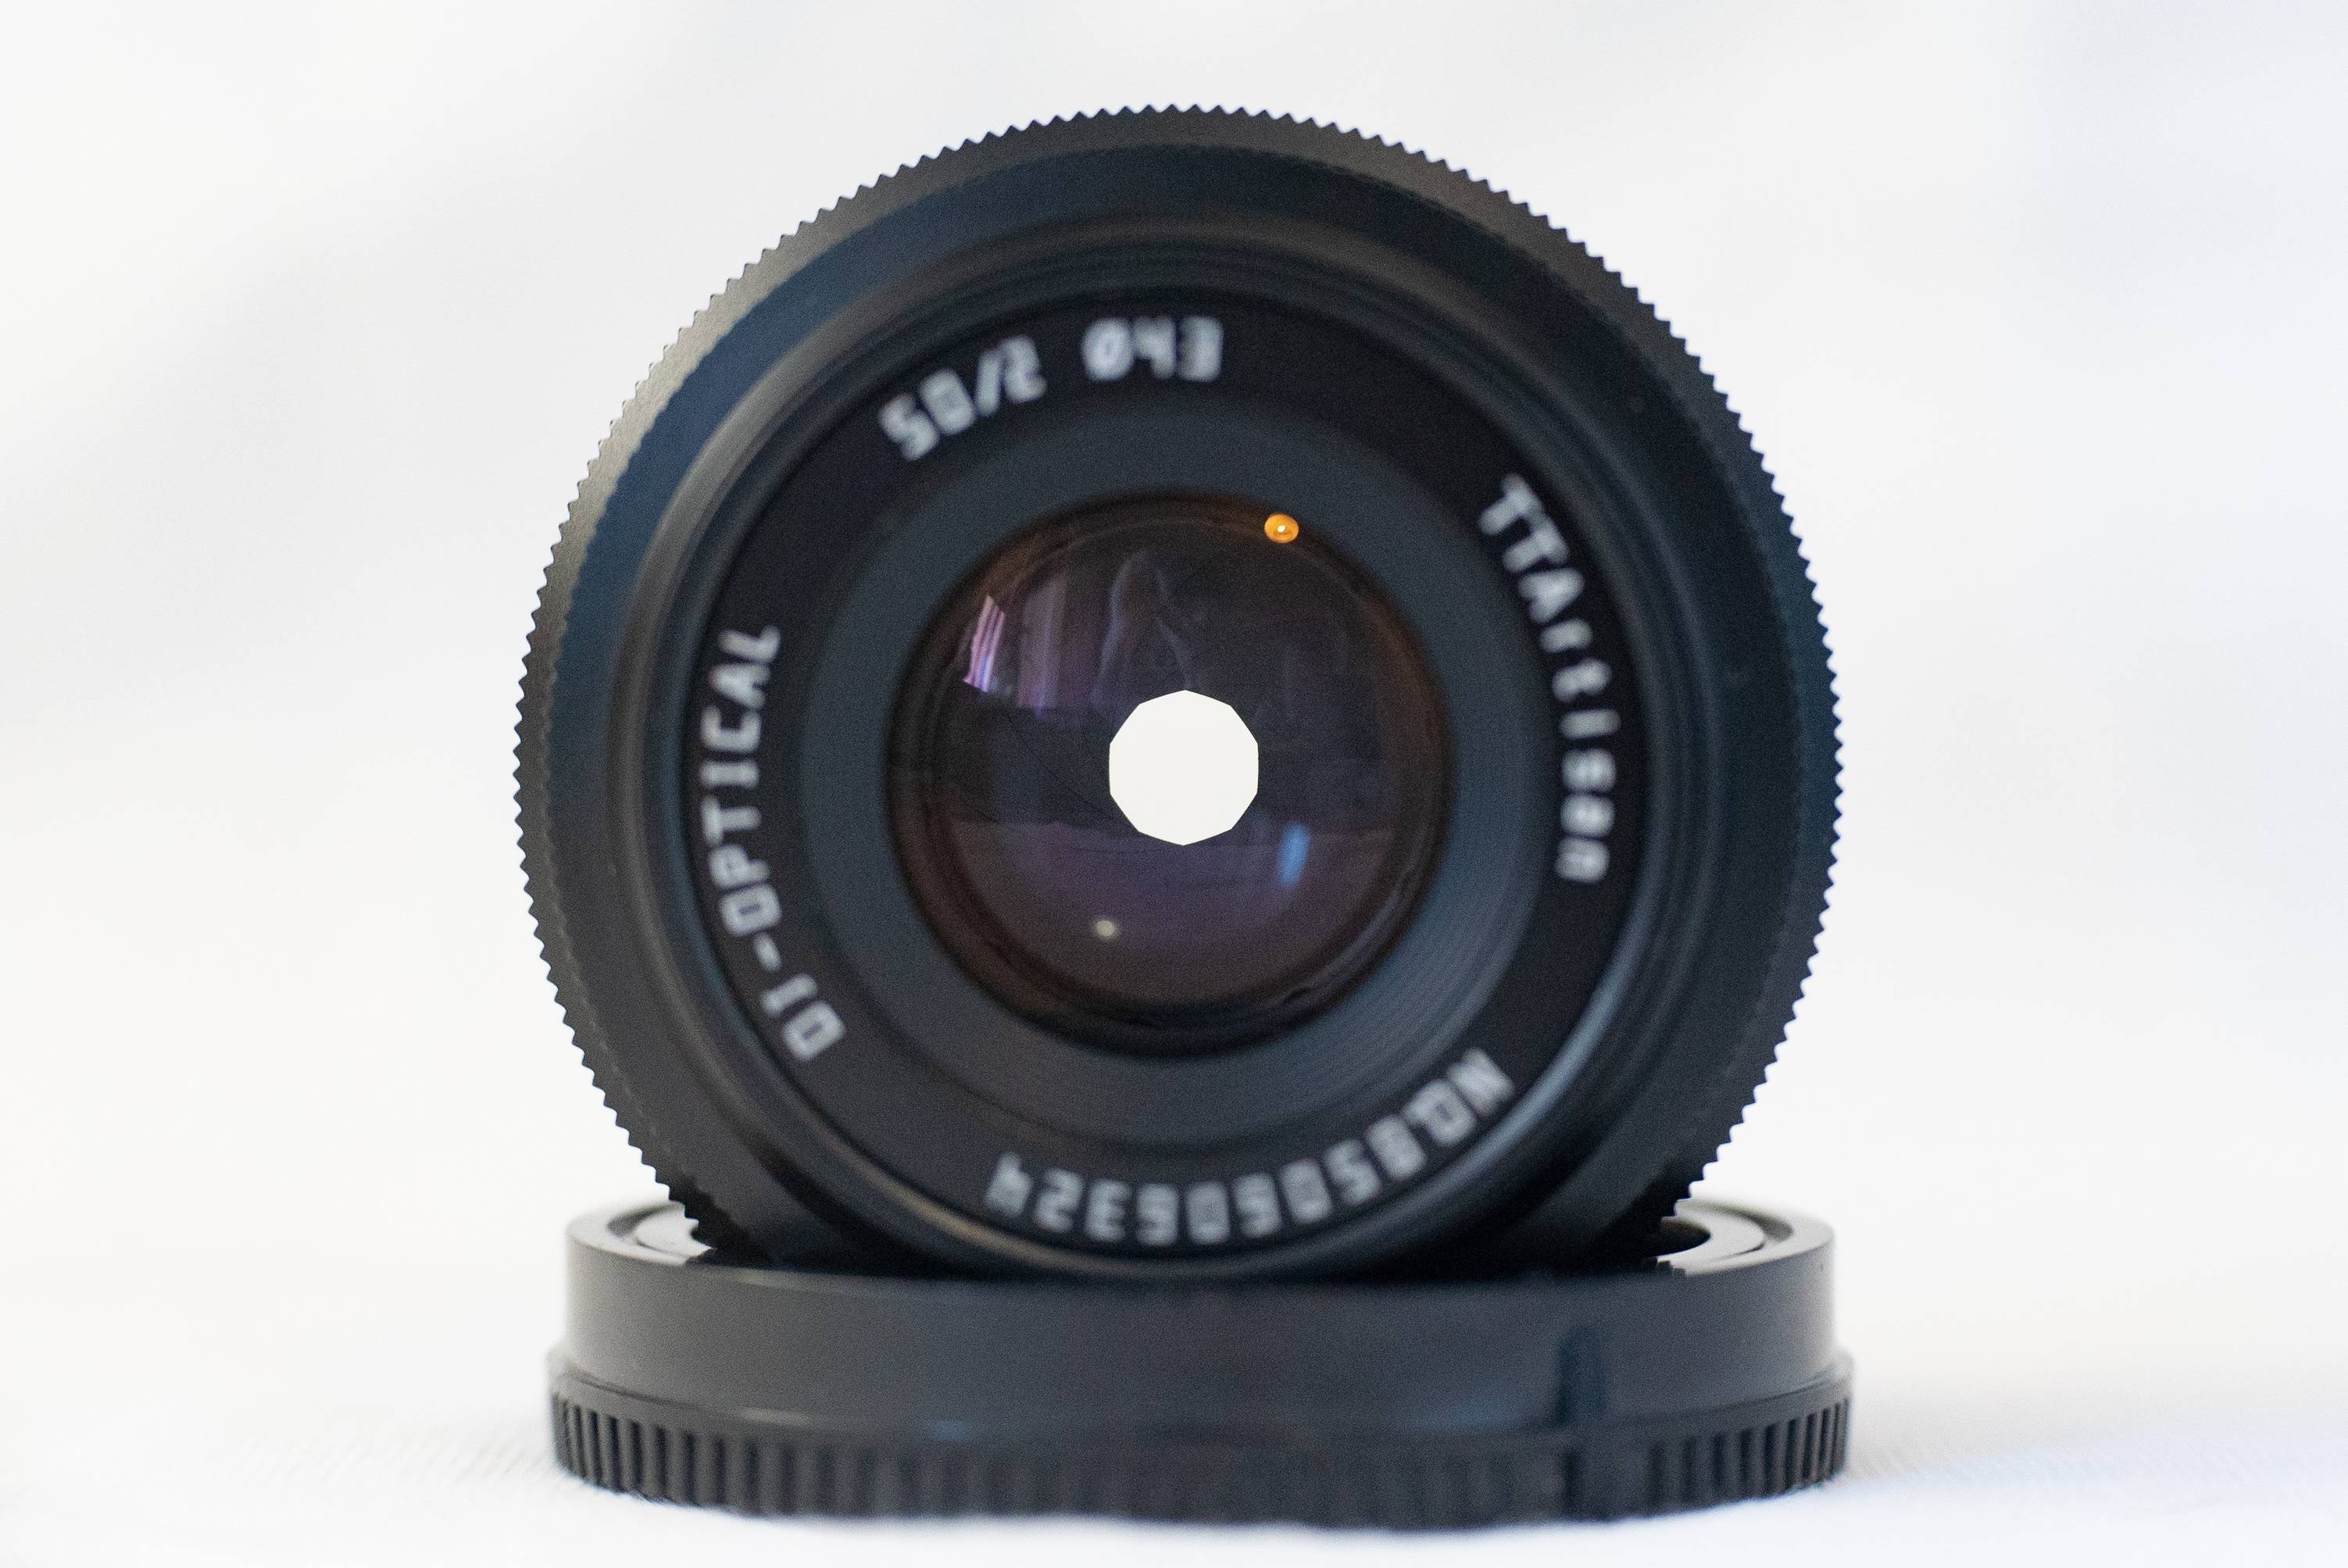 The pupil of the lens with a covered aperture remains almost perfectly round.